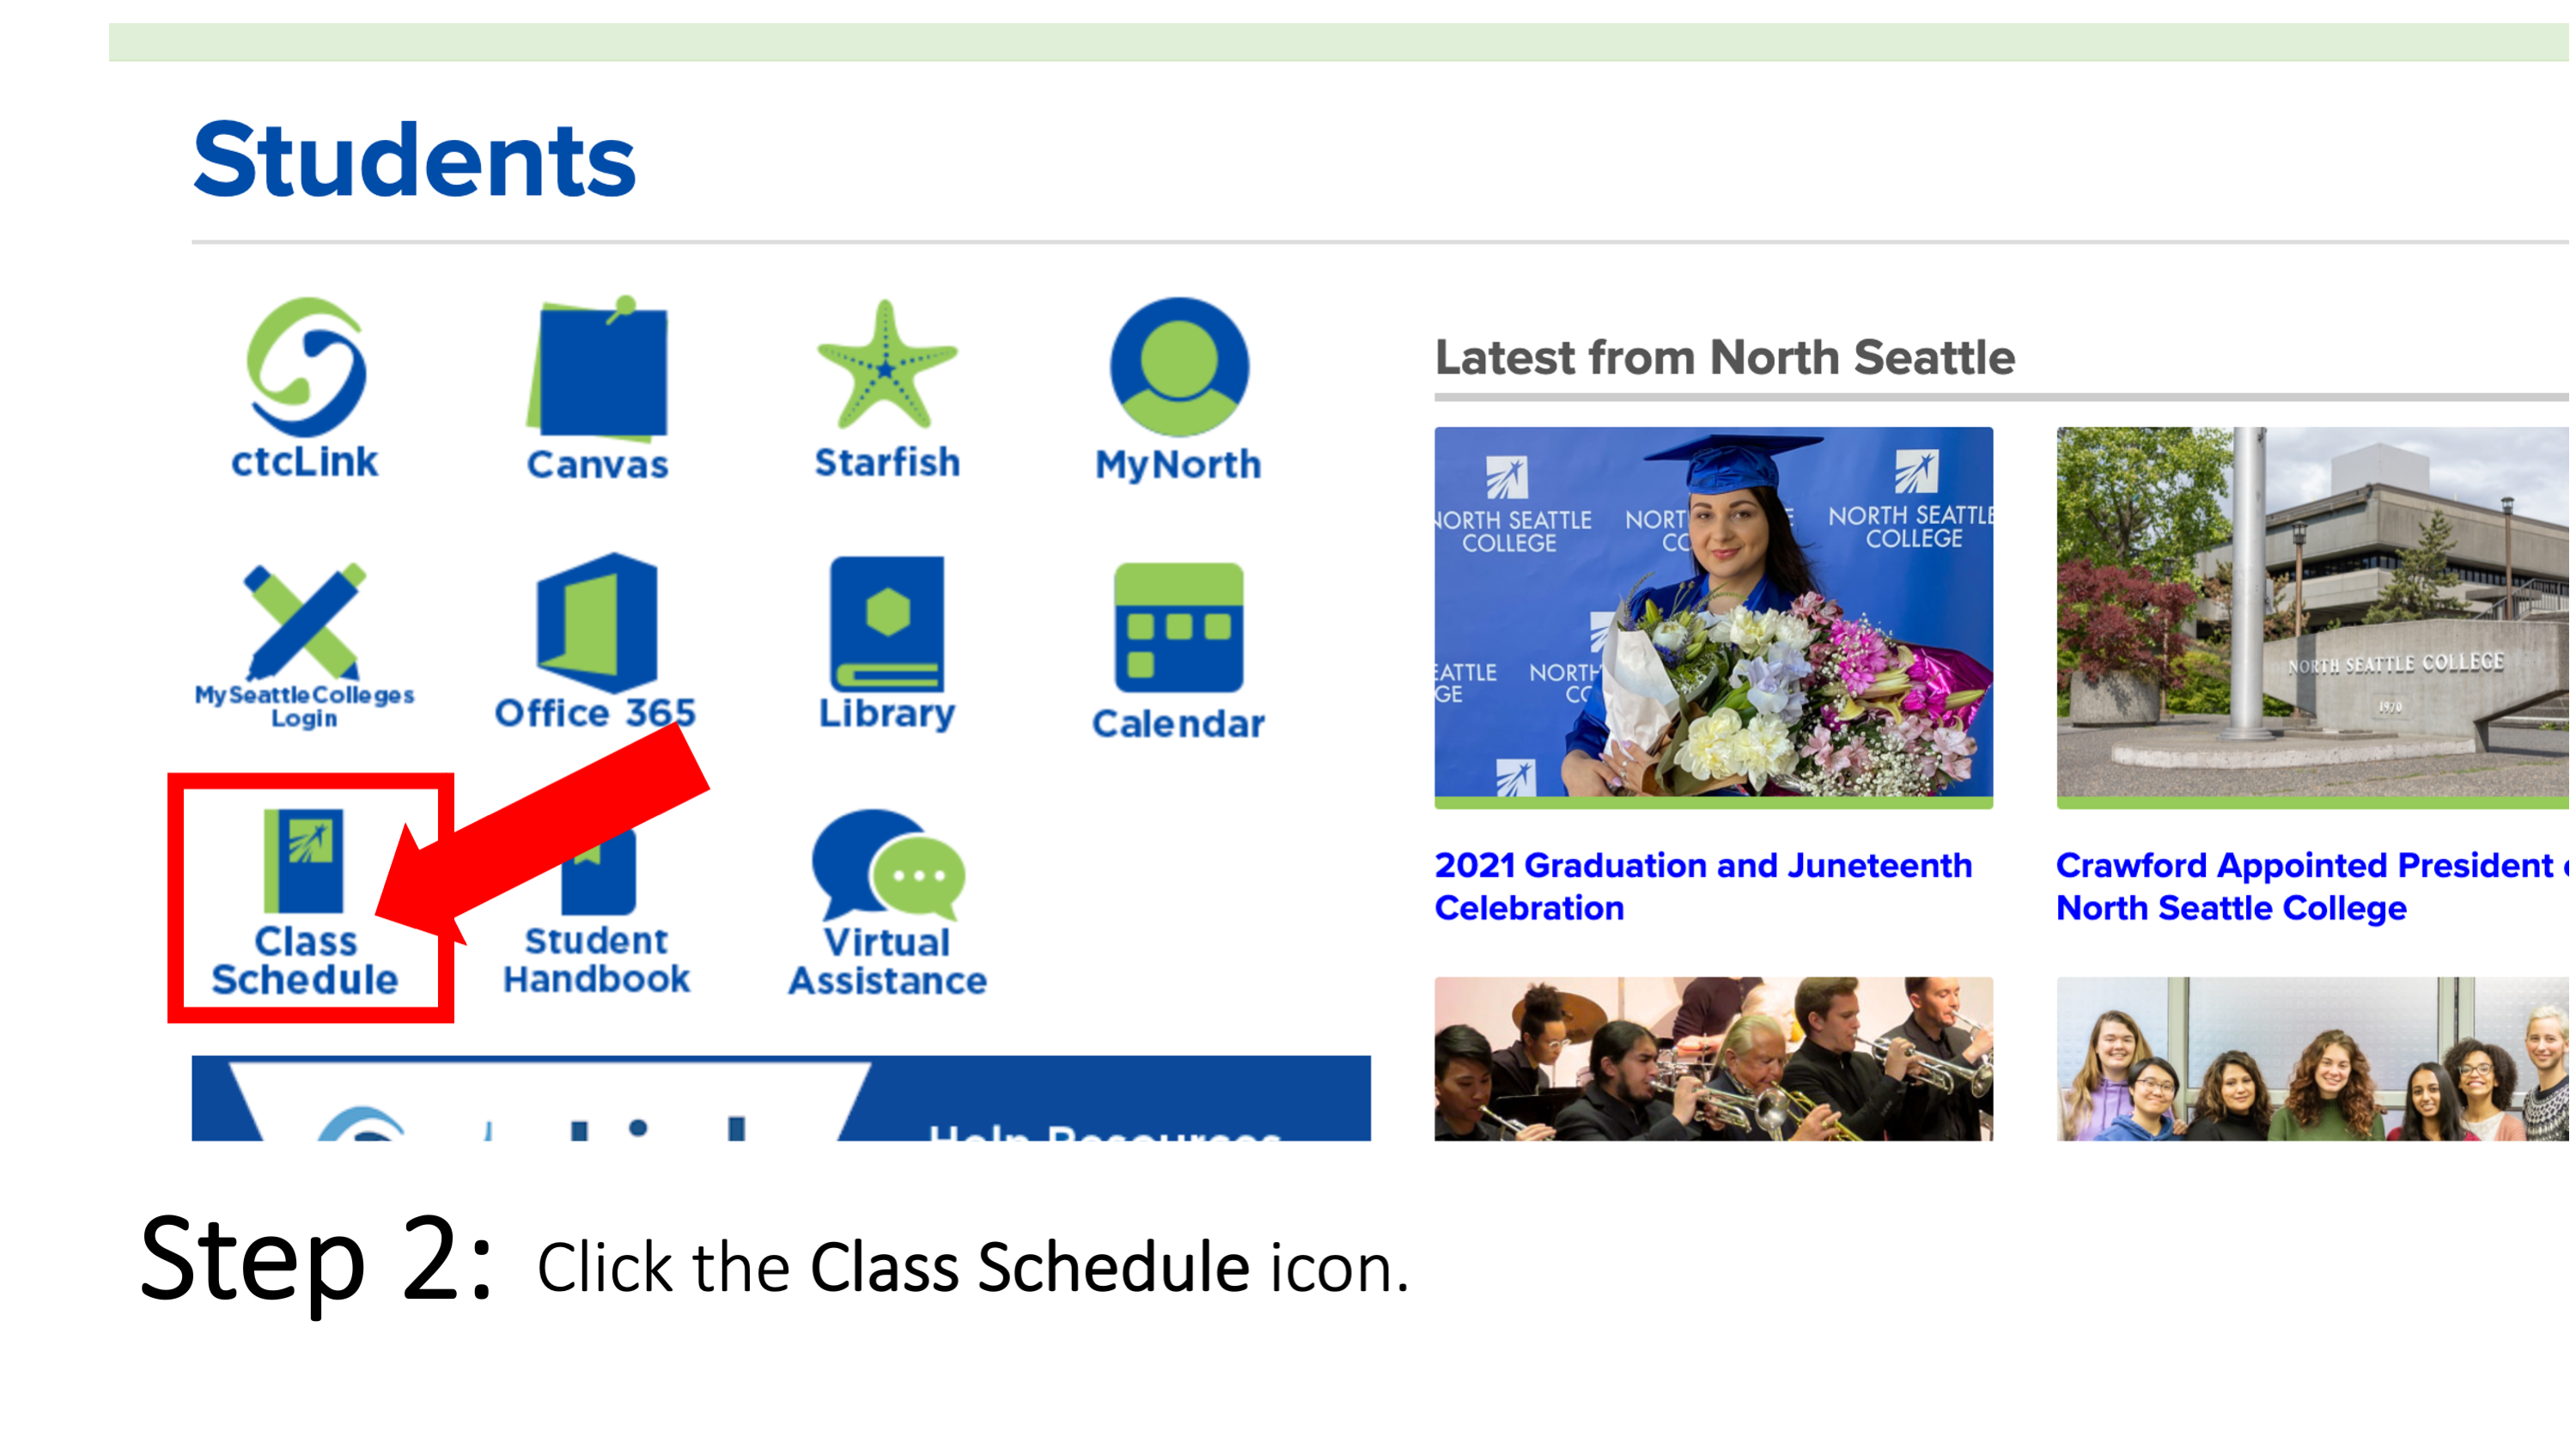 Step 2: Click the Class Schedule icon.